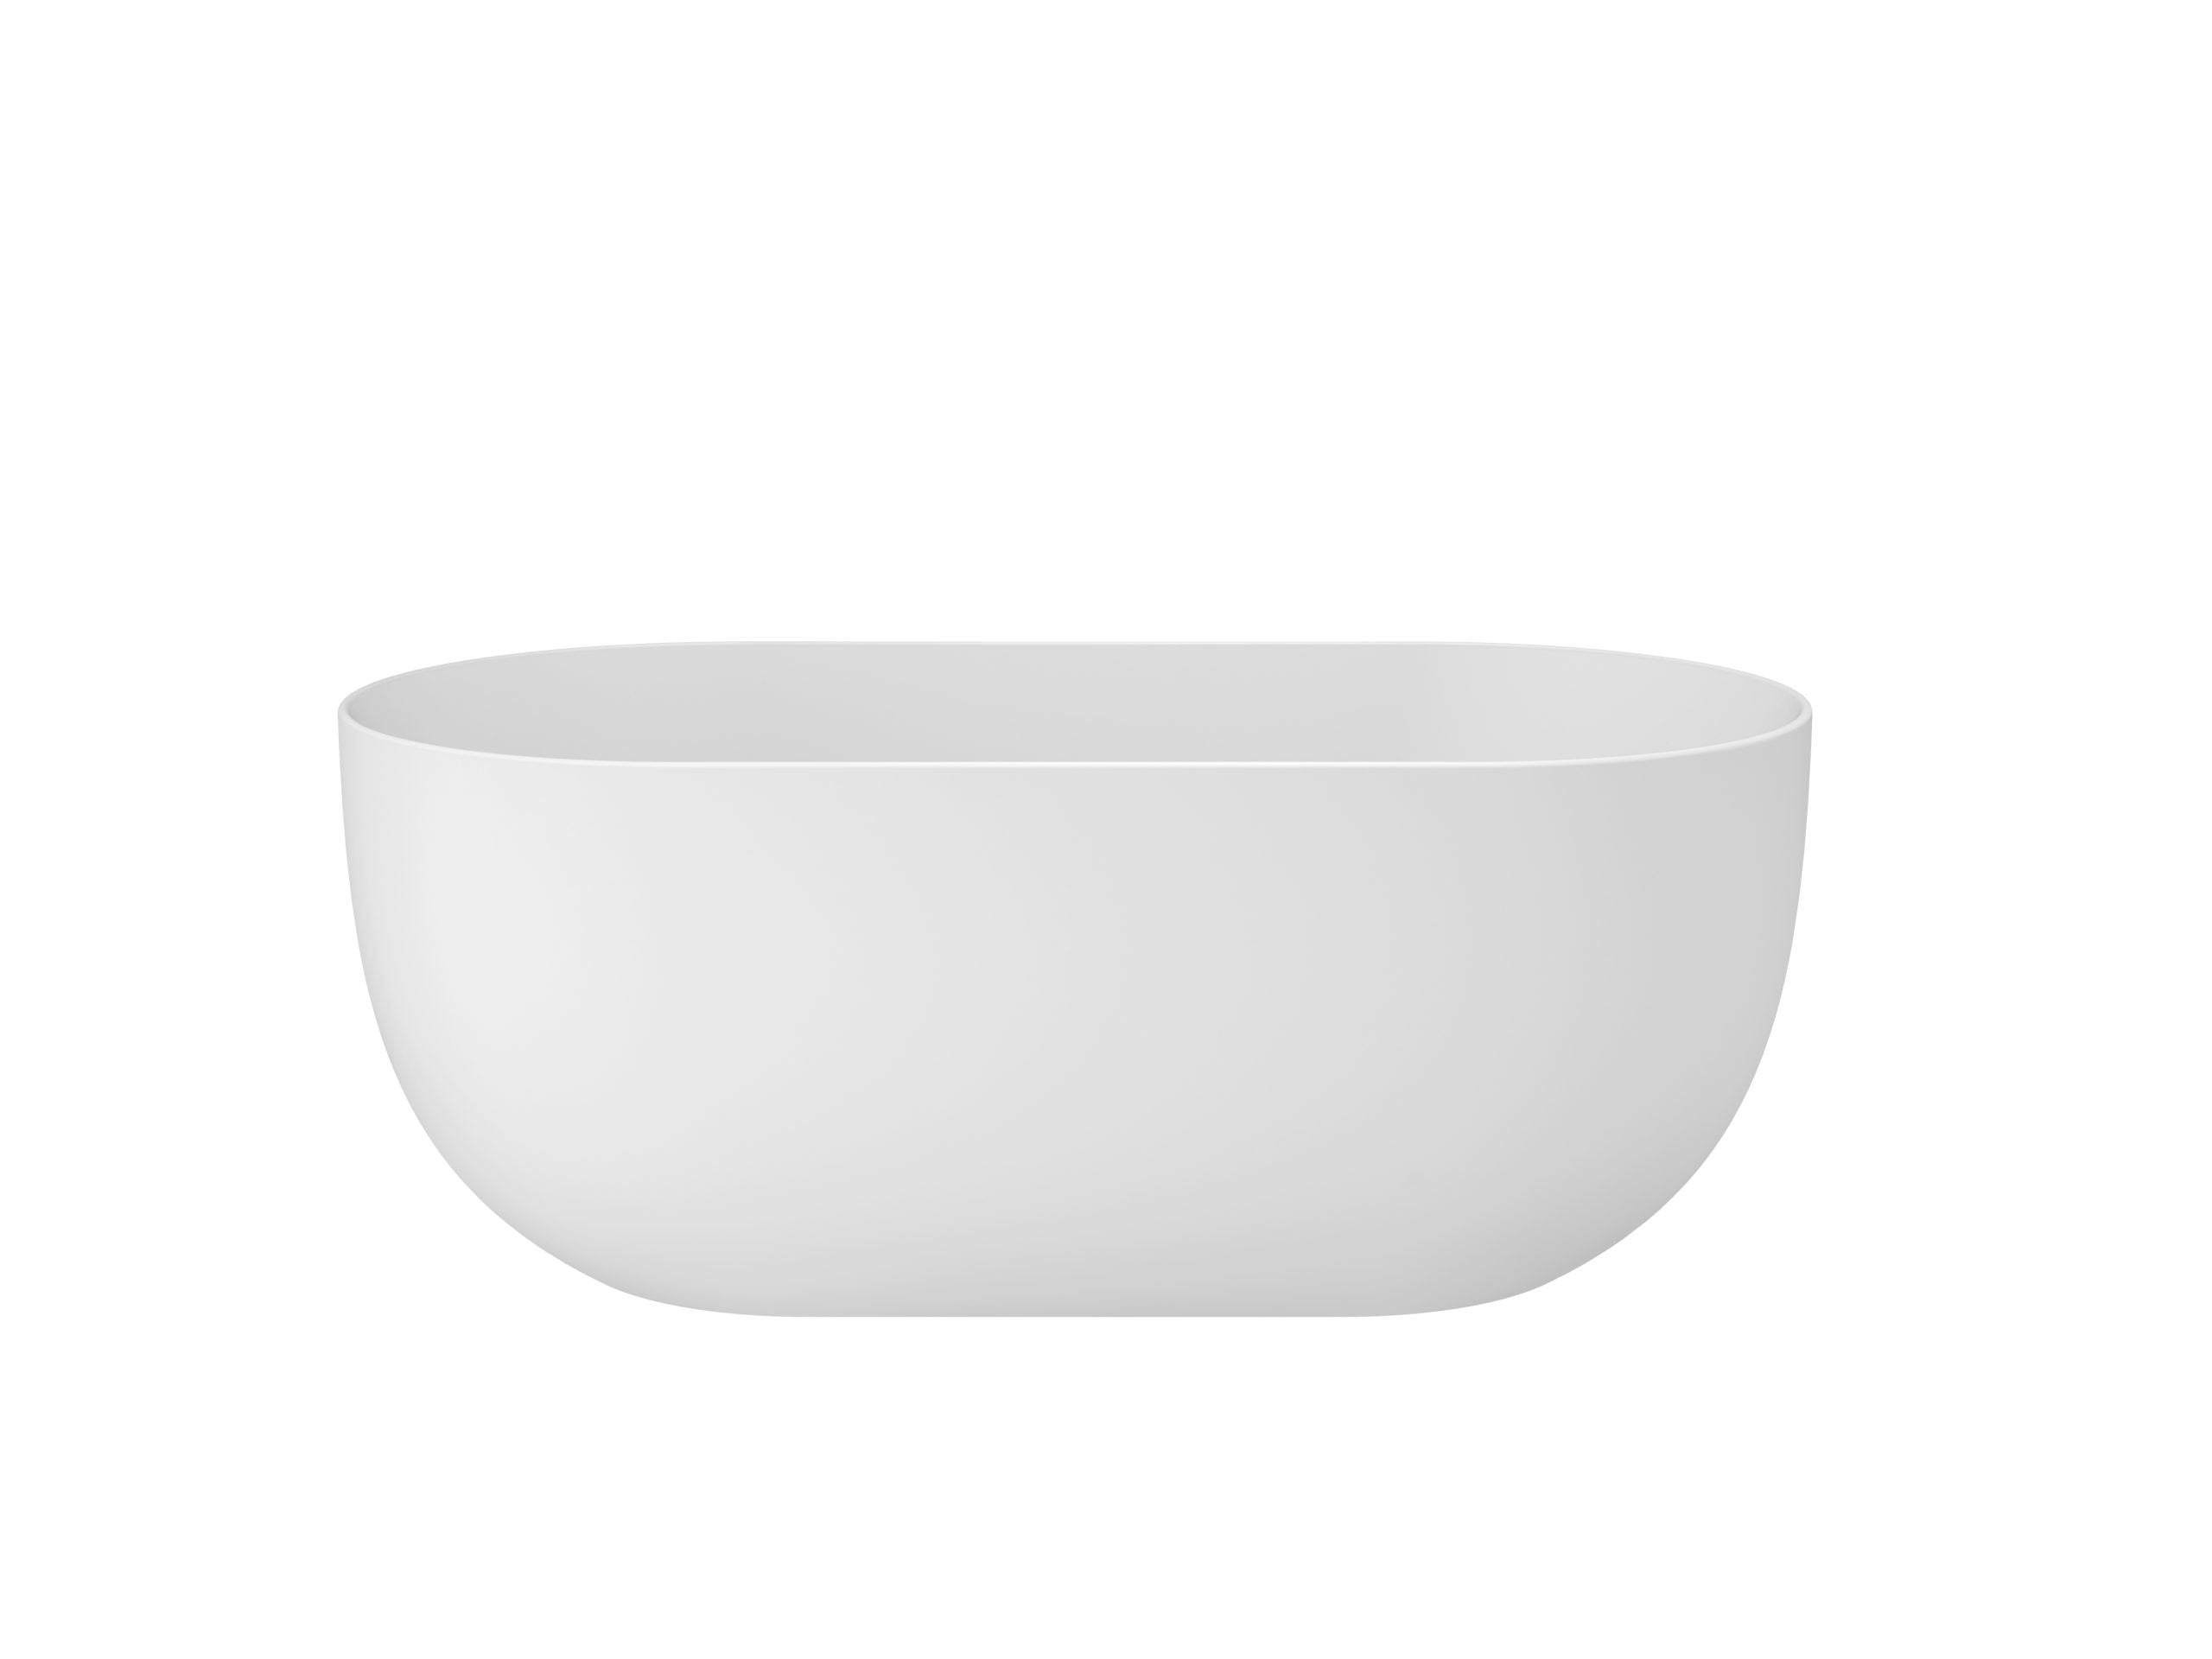 LINSOL NORA FREESTANDING BATHTUB MATTE WHITE (AVAILABLE IN 1500MM AND 1700MM)